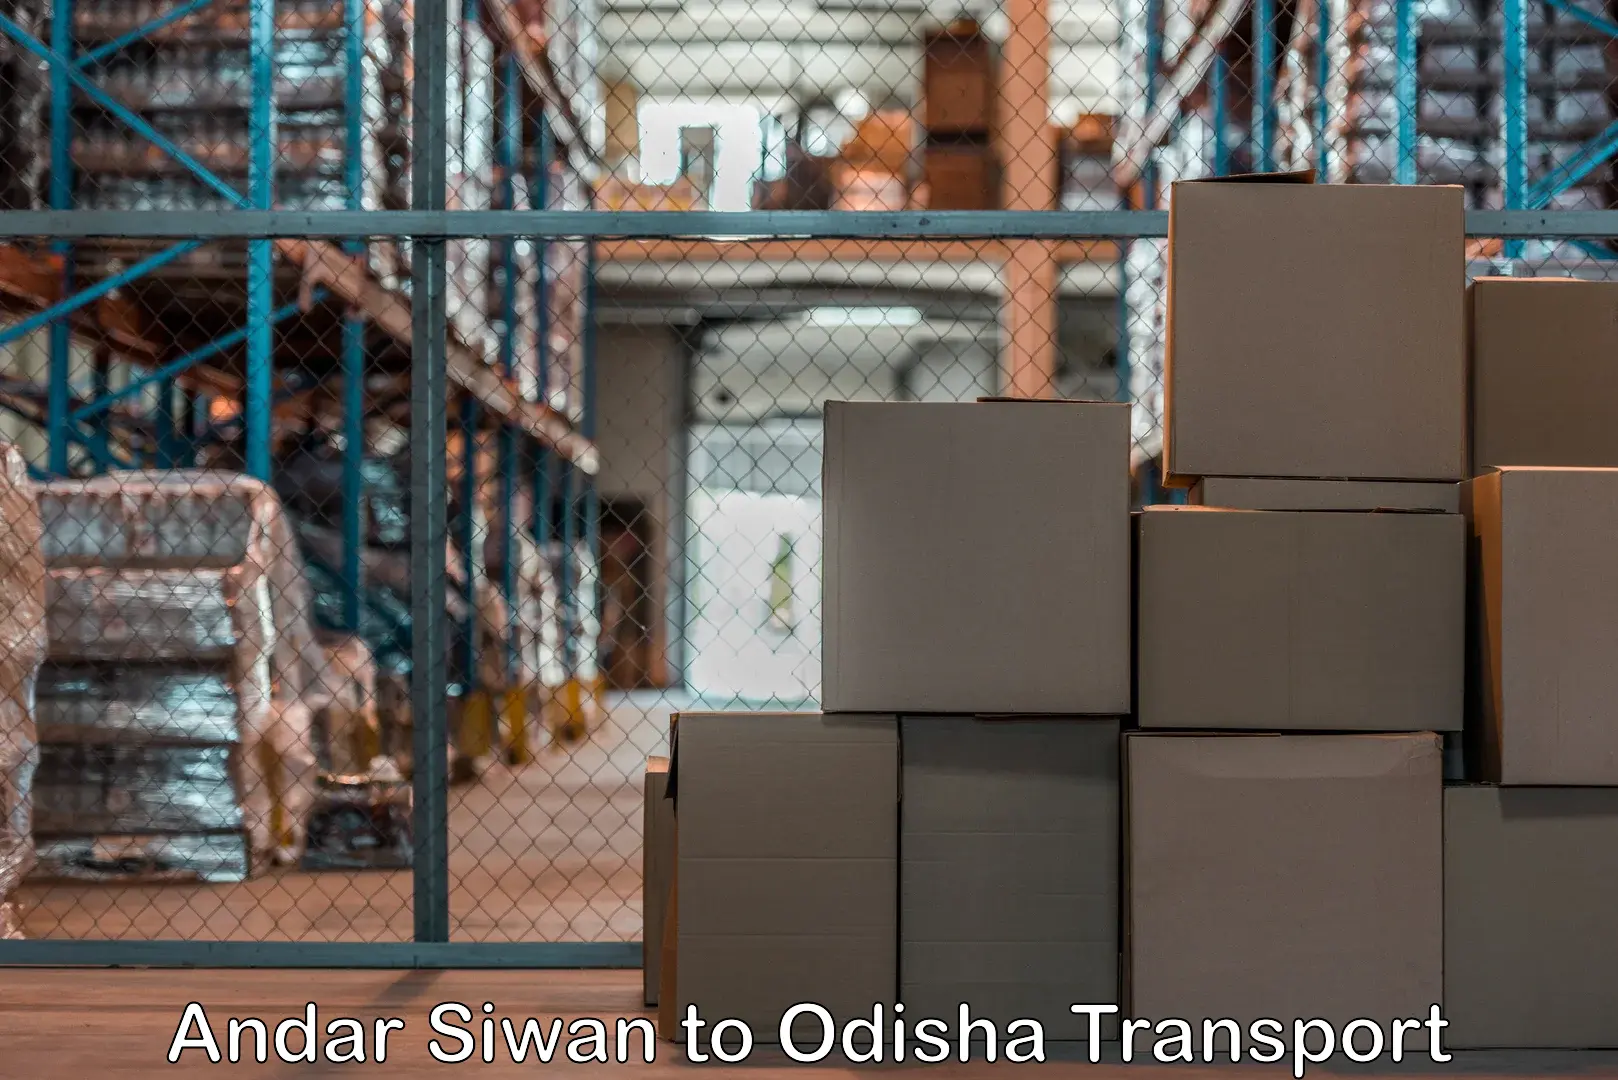 Air freight transport services in Andar Siwan to Kandhamal